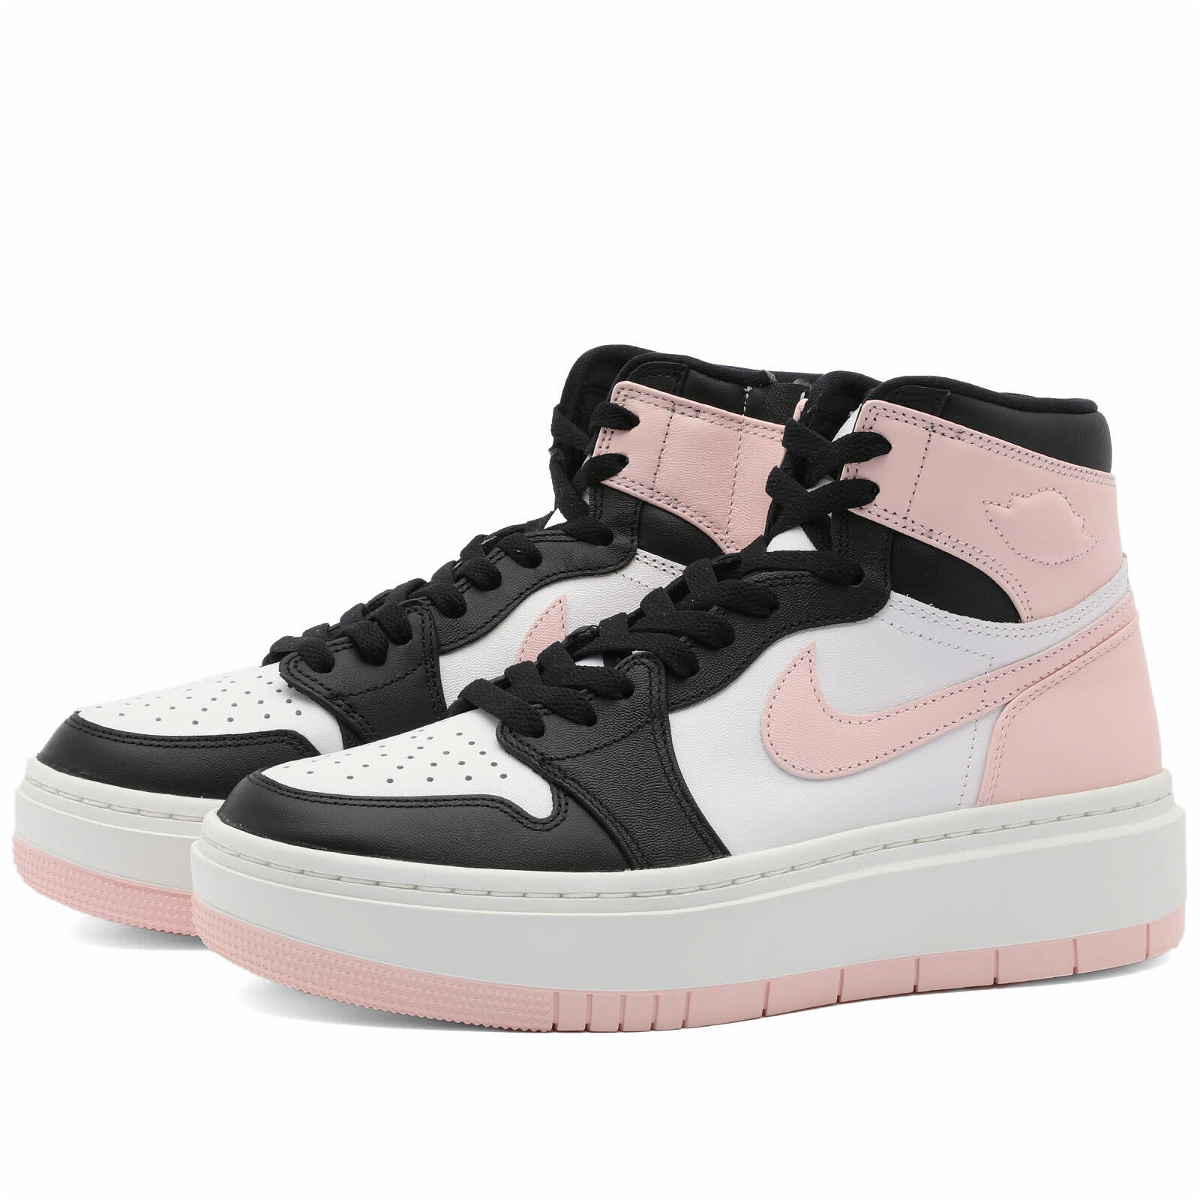 Where To Buy Women's Air Jordan 1 Atmosphere And More